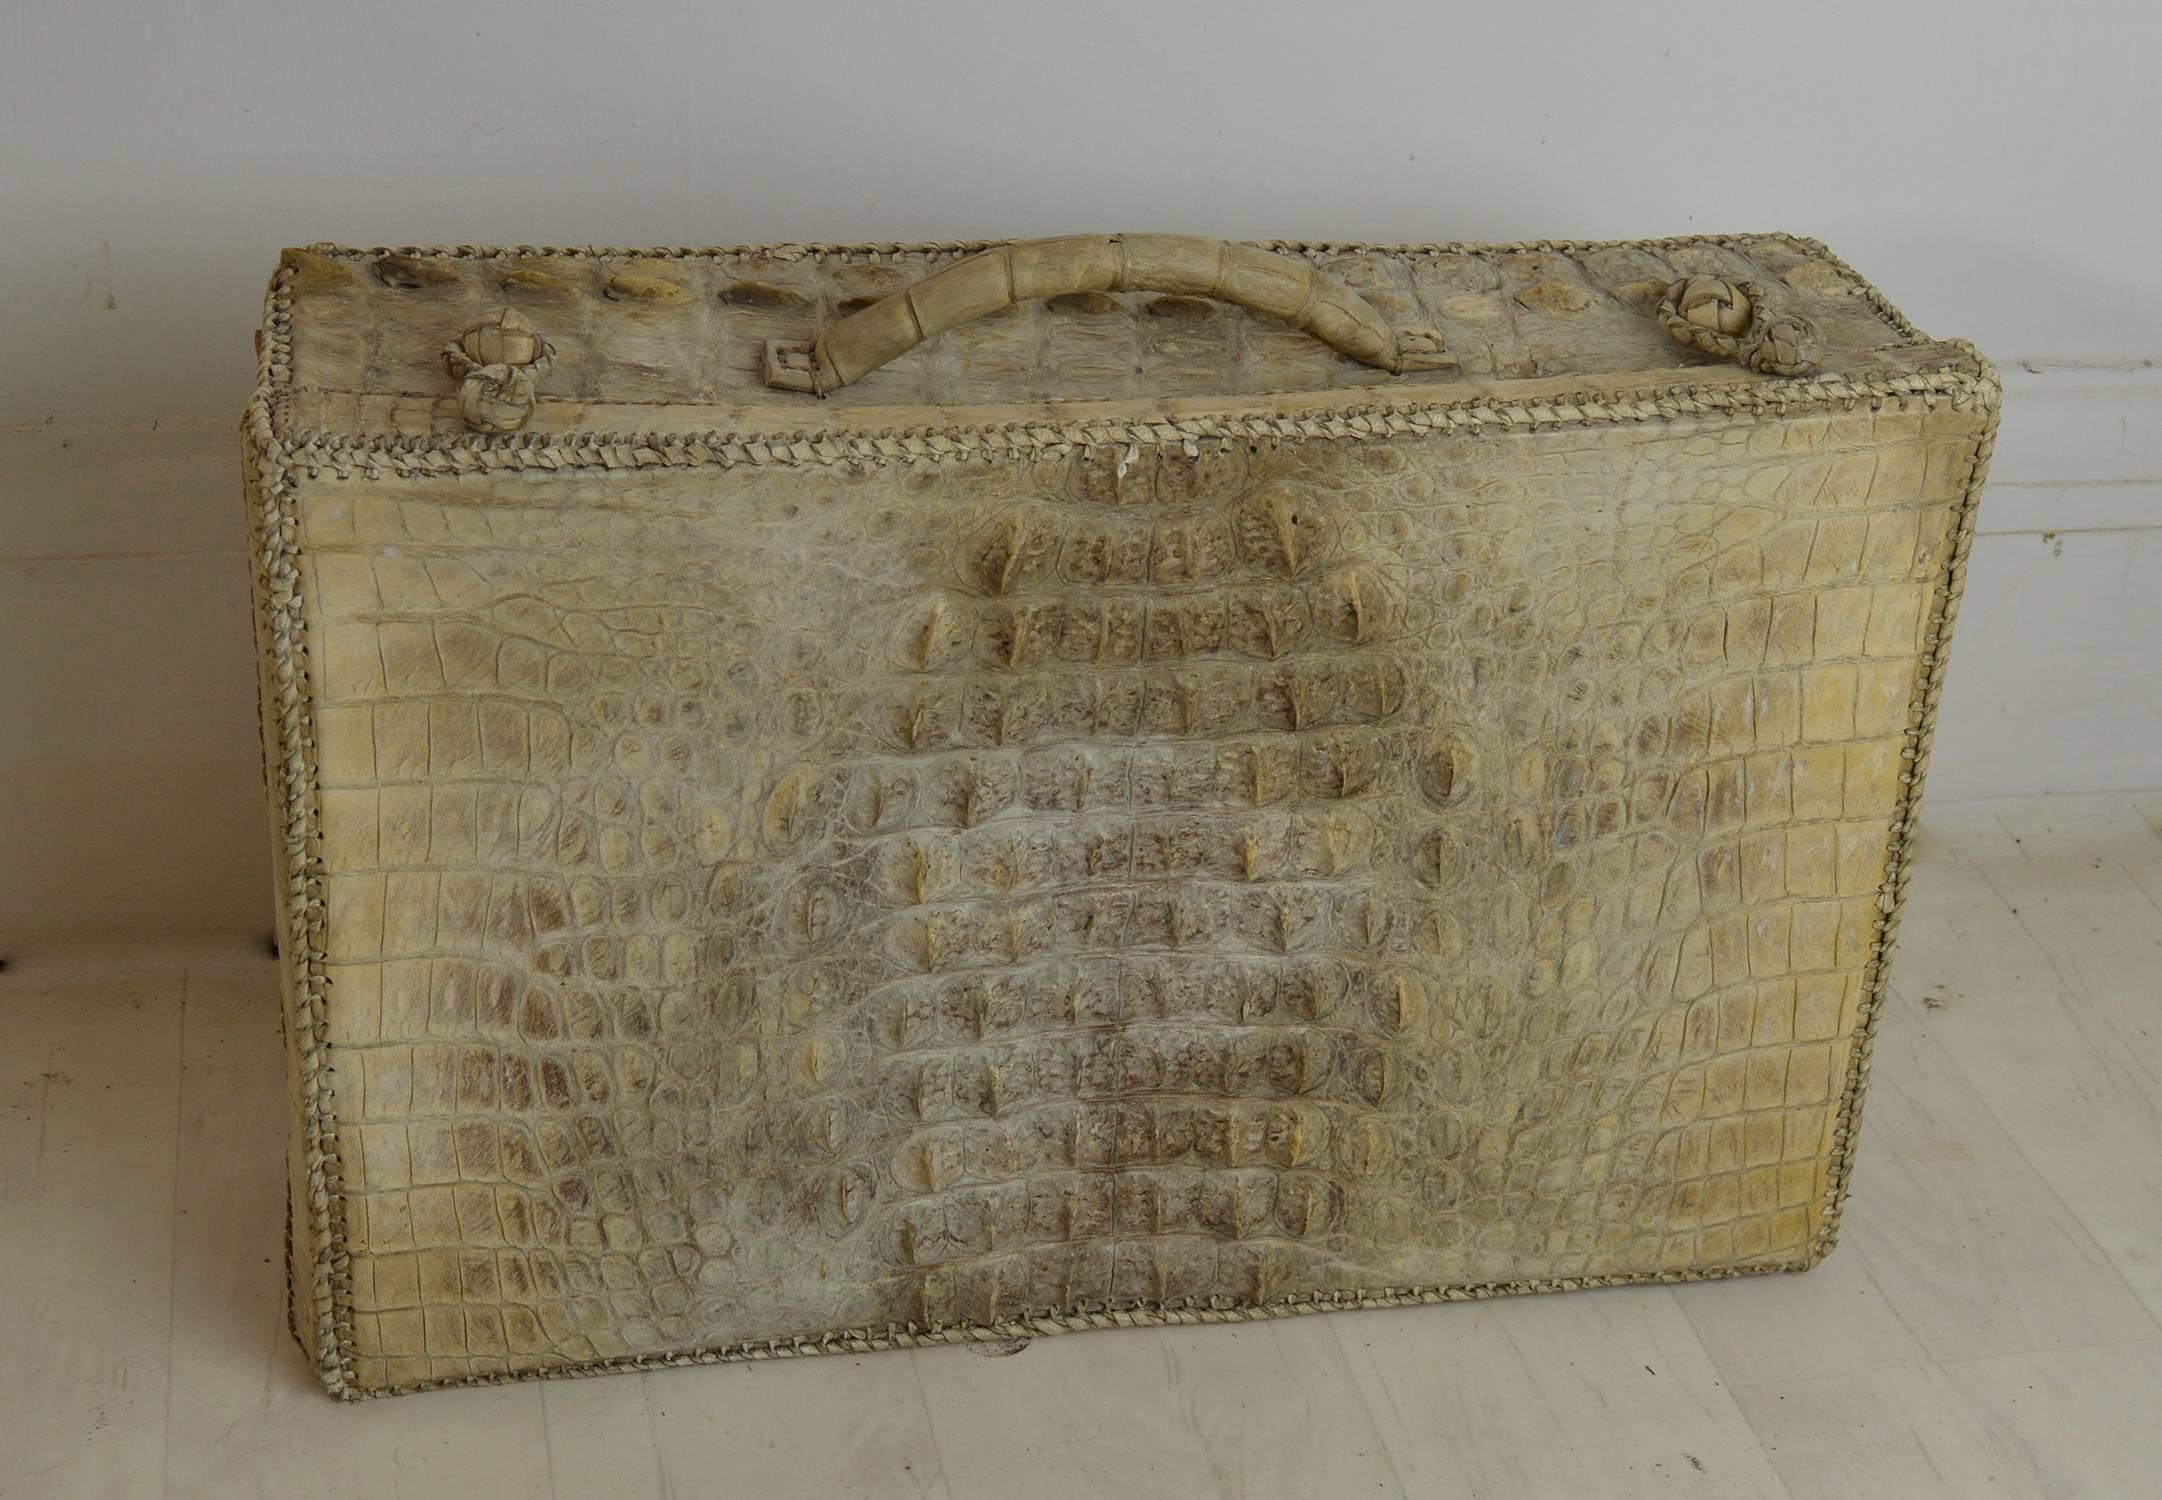 Beautiful white crocodile suitcase or vanity case.

Sensational color of off-white or cream.

Uncertain of the origin but it has a certain ethnicity about it. Probably handcrafted in India or Africa.

Sumptuous cream leather interior.
    